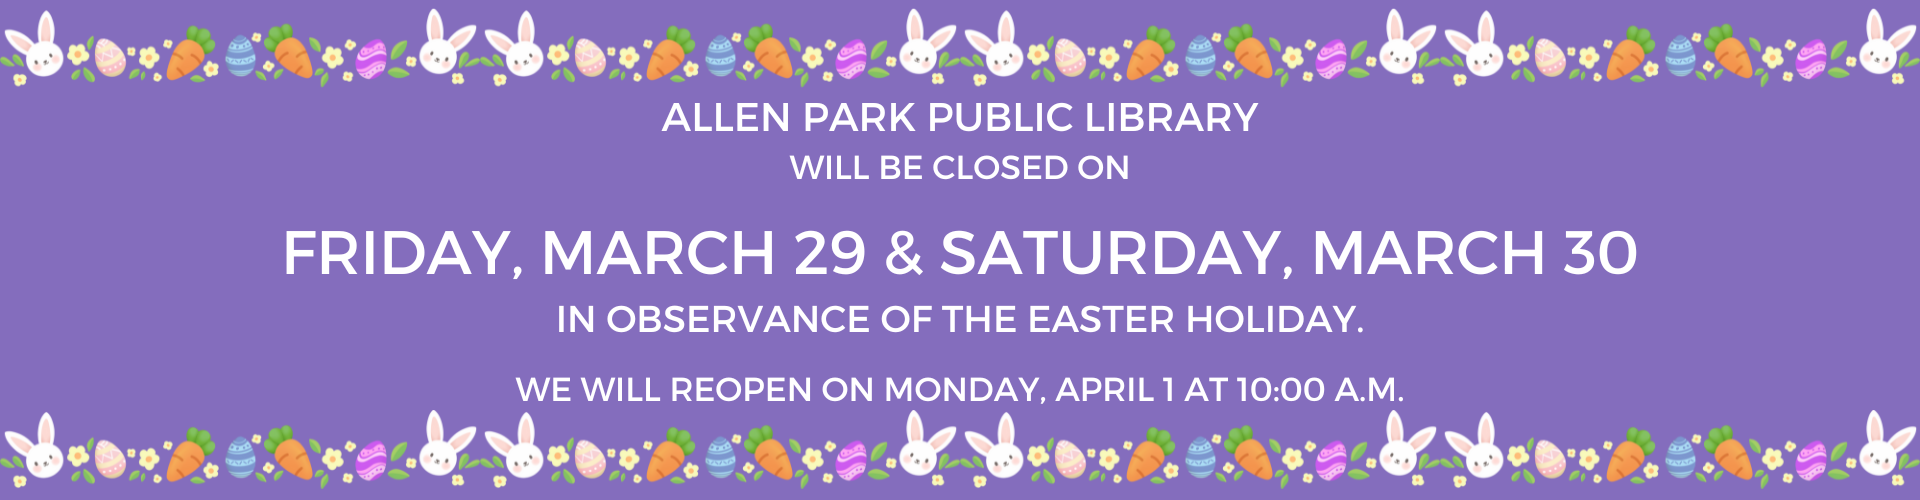 Allen Park Public Library will be closed on Friday, March 29 and Saturday, March 30 in observance of the Easter holiday. We will reopen on Monday, April 1 at 10:00 a.m.